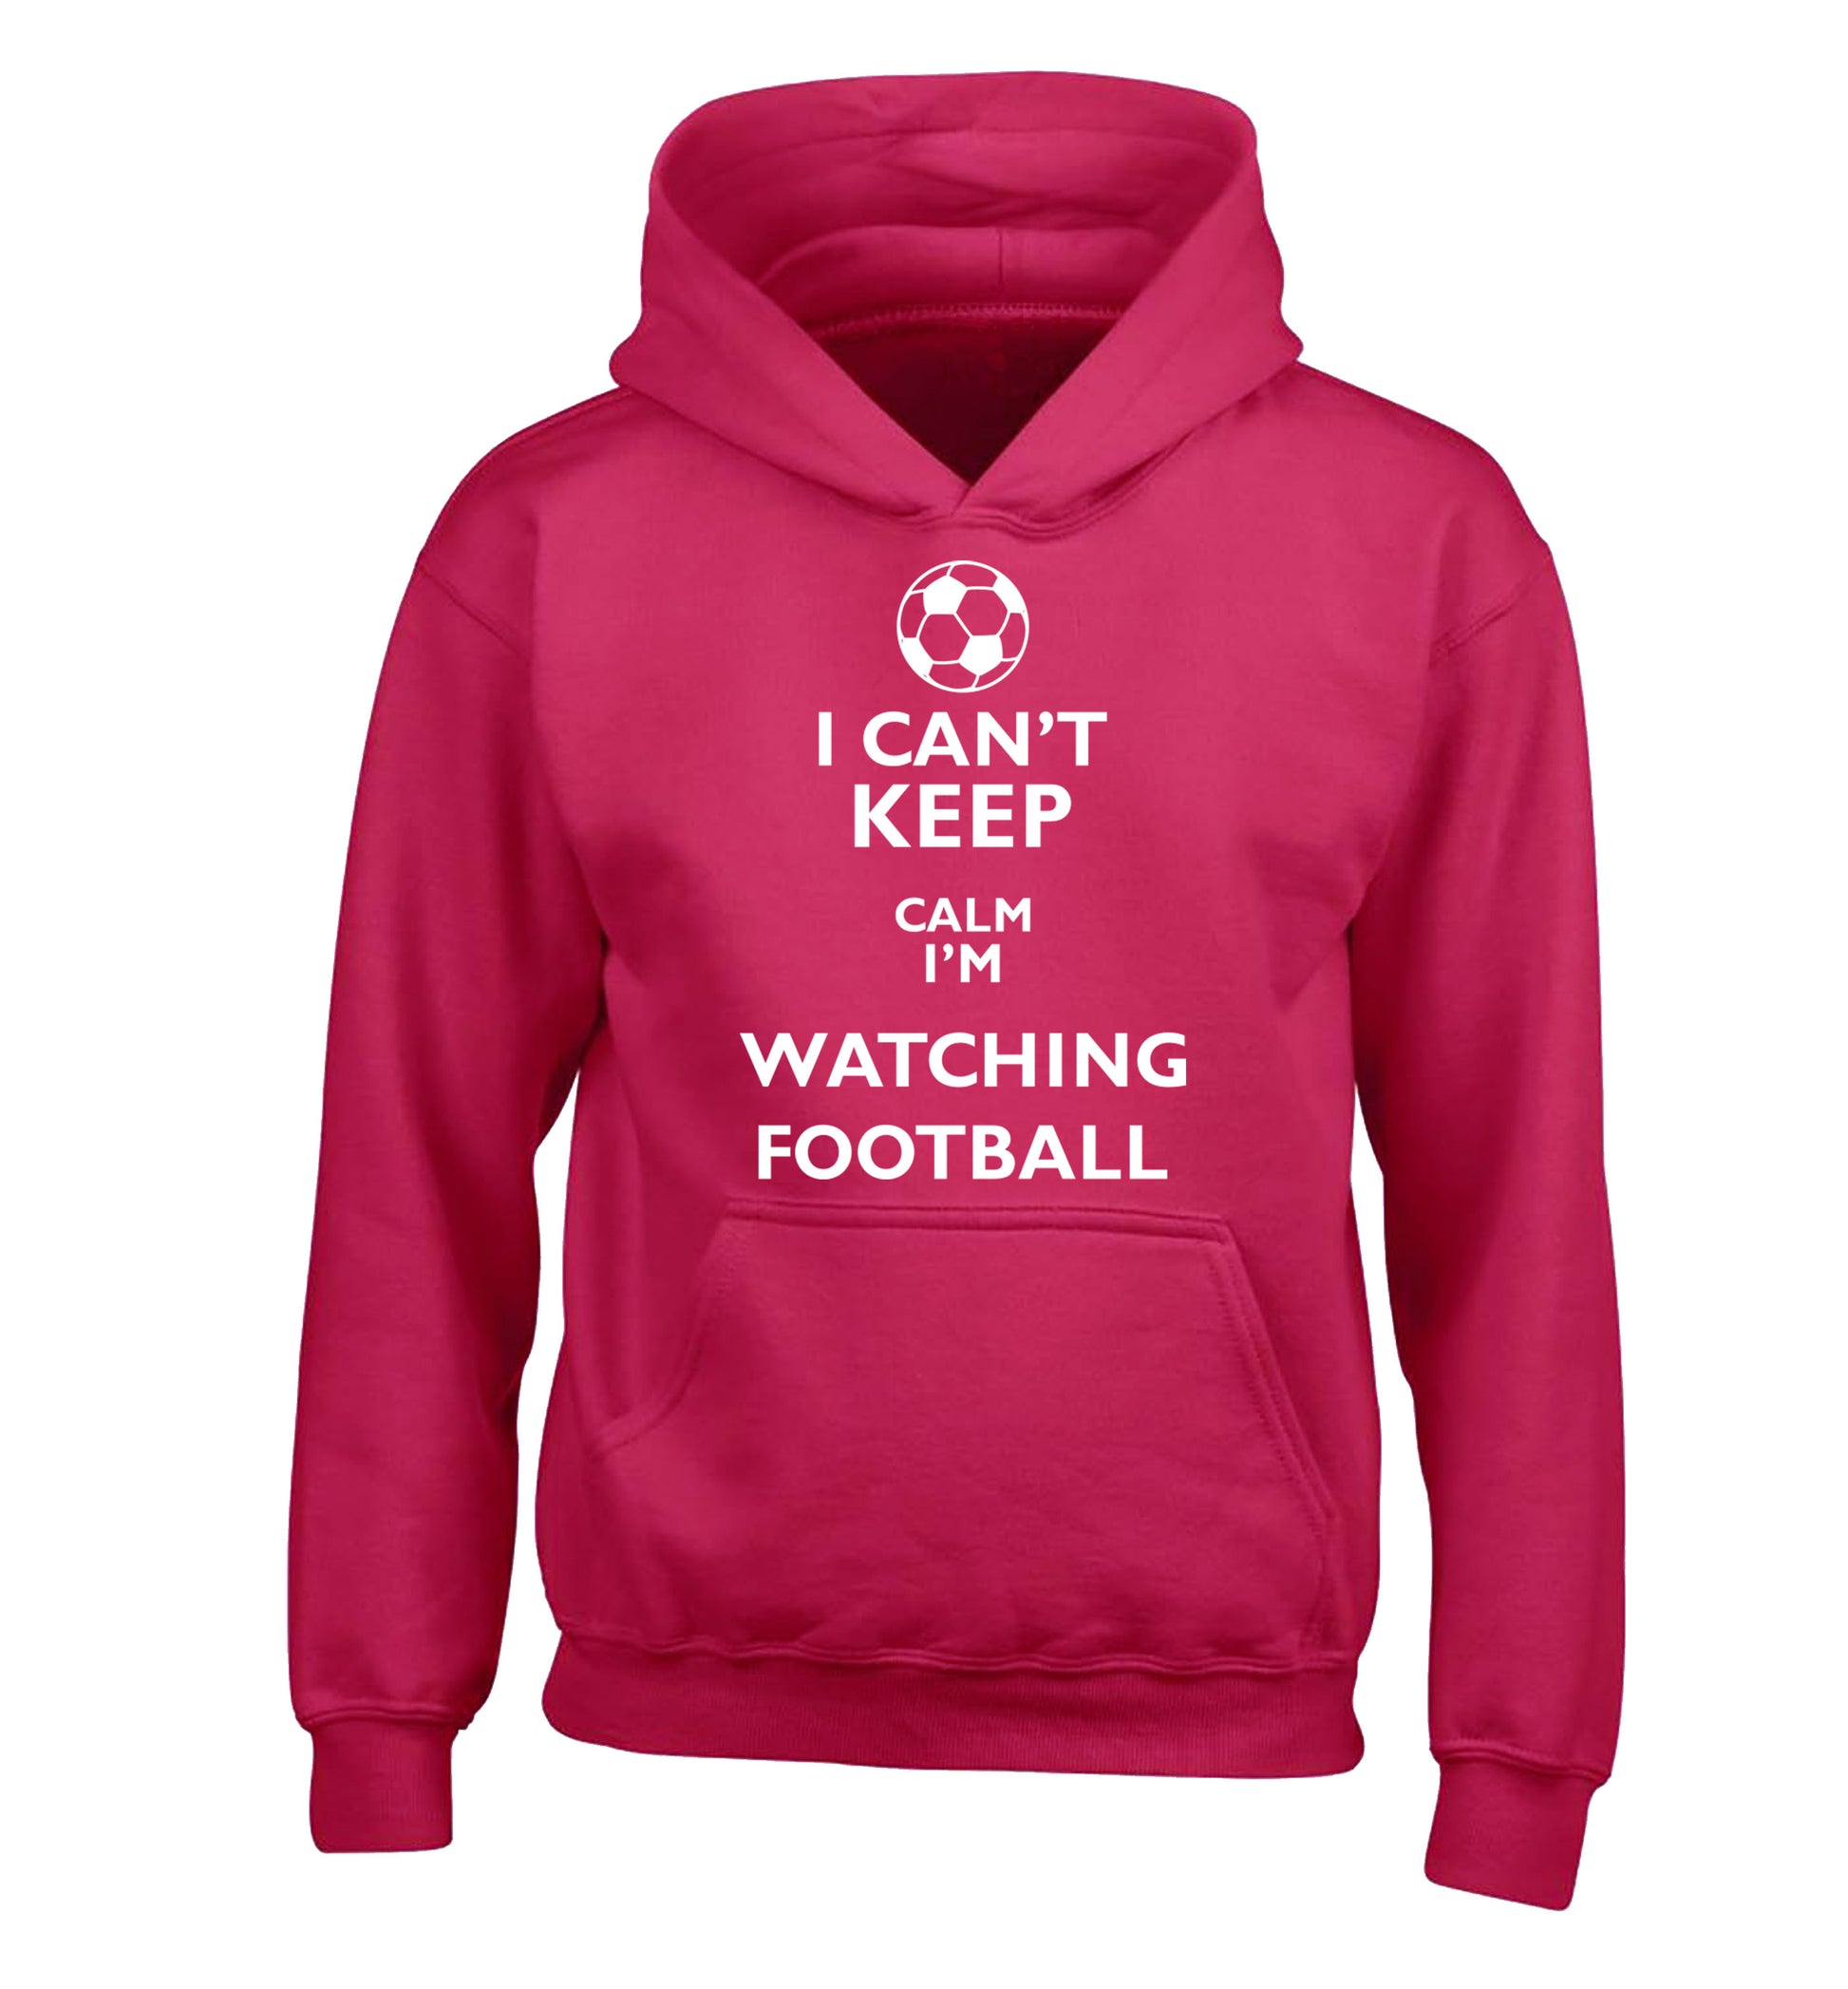 I can't keep calm I'm watching the football children's pink hoodie 12-14 Years